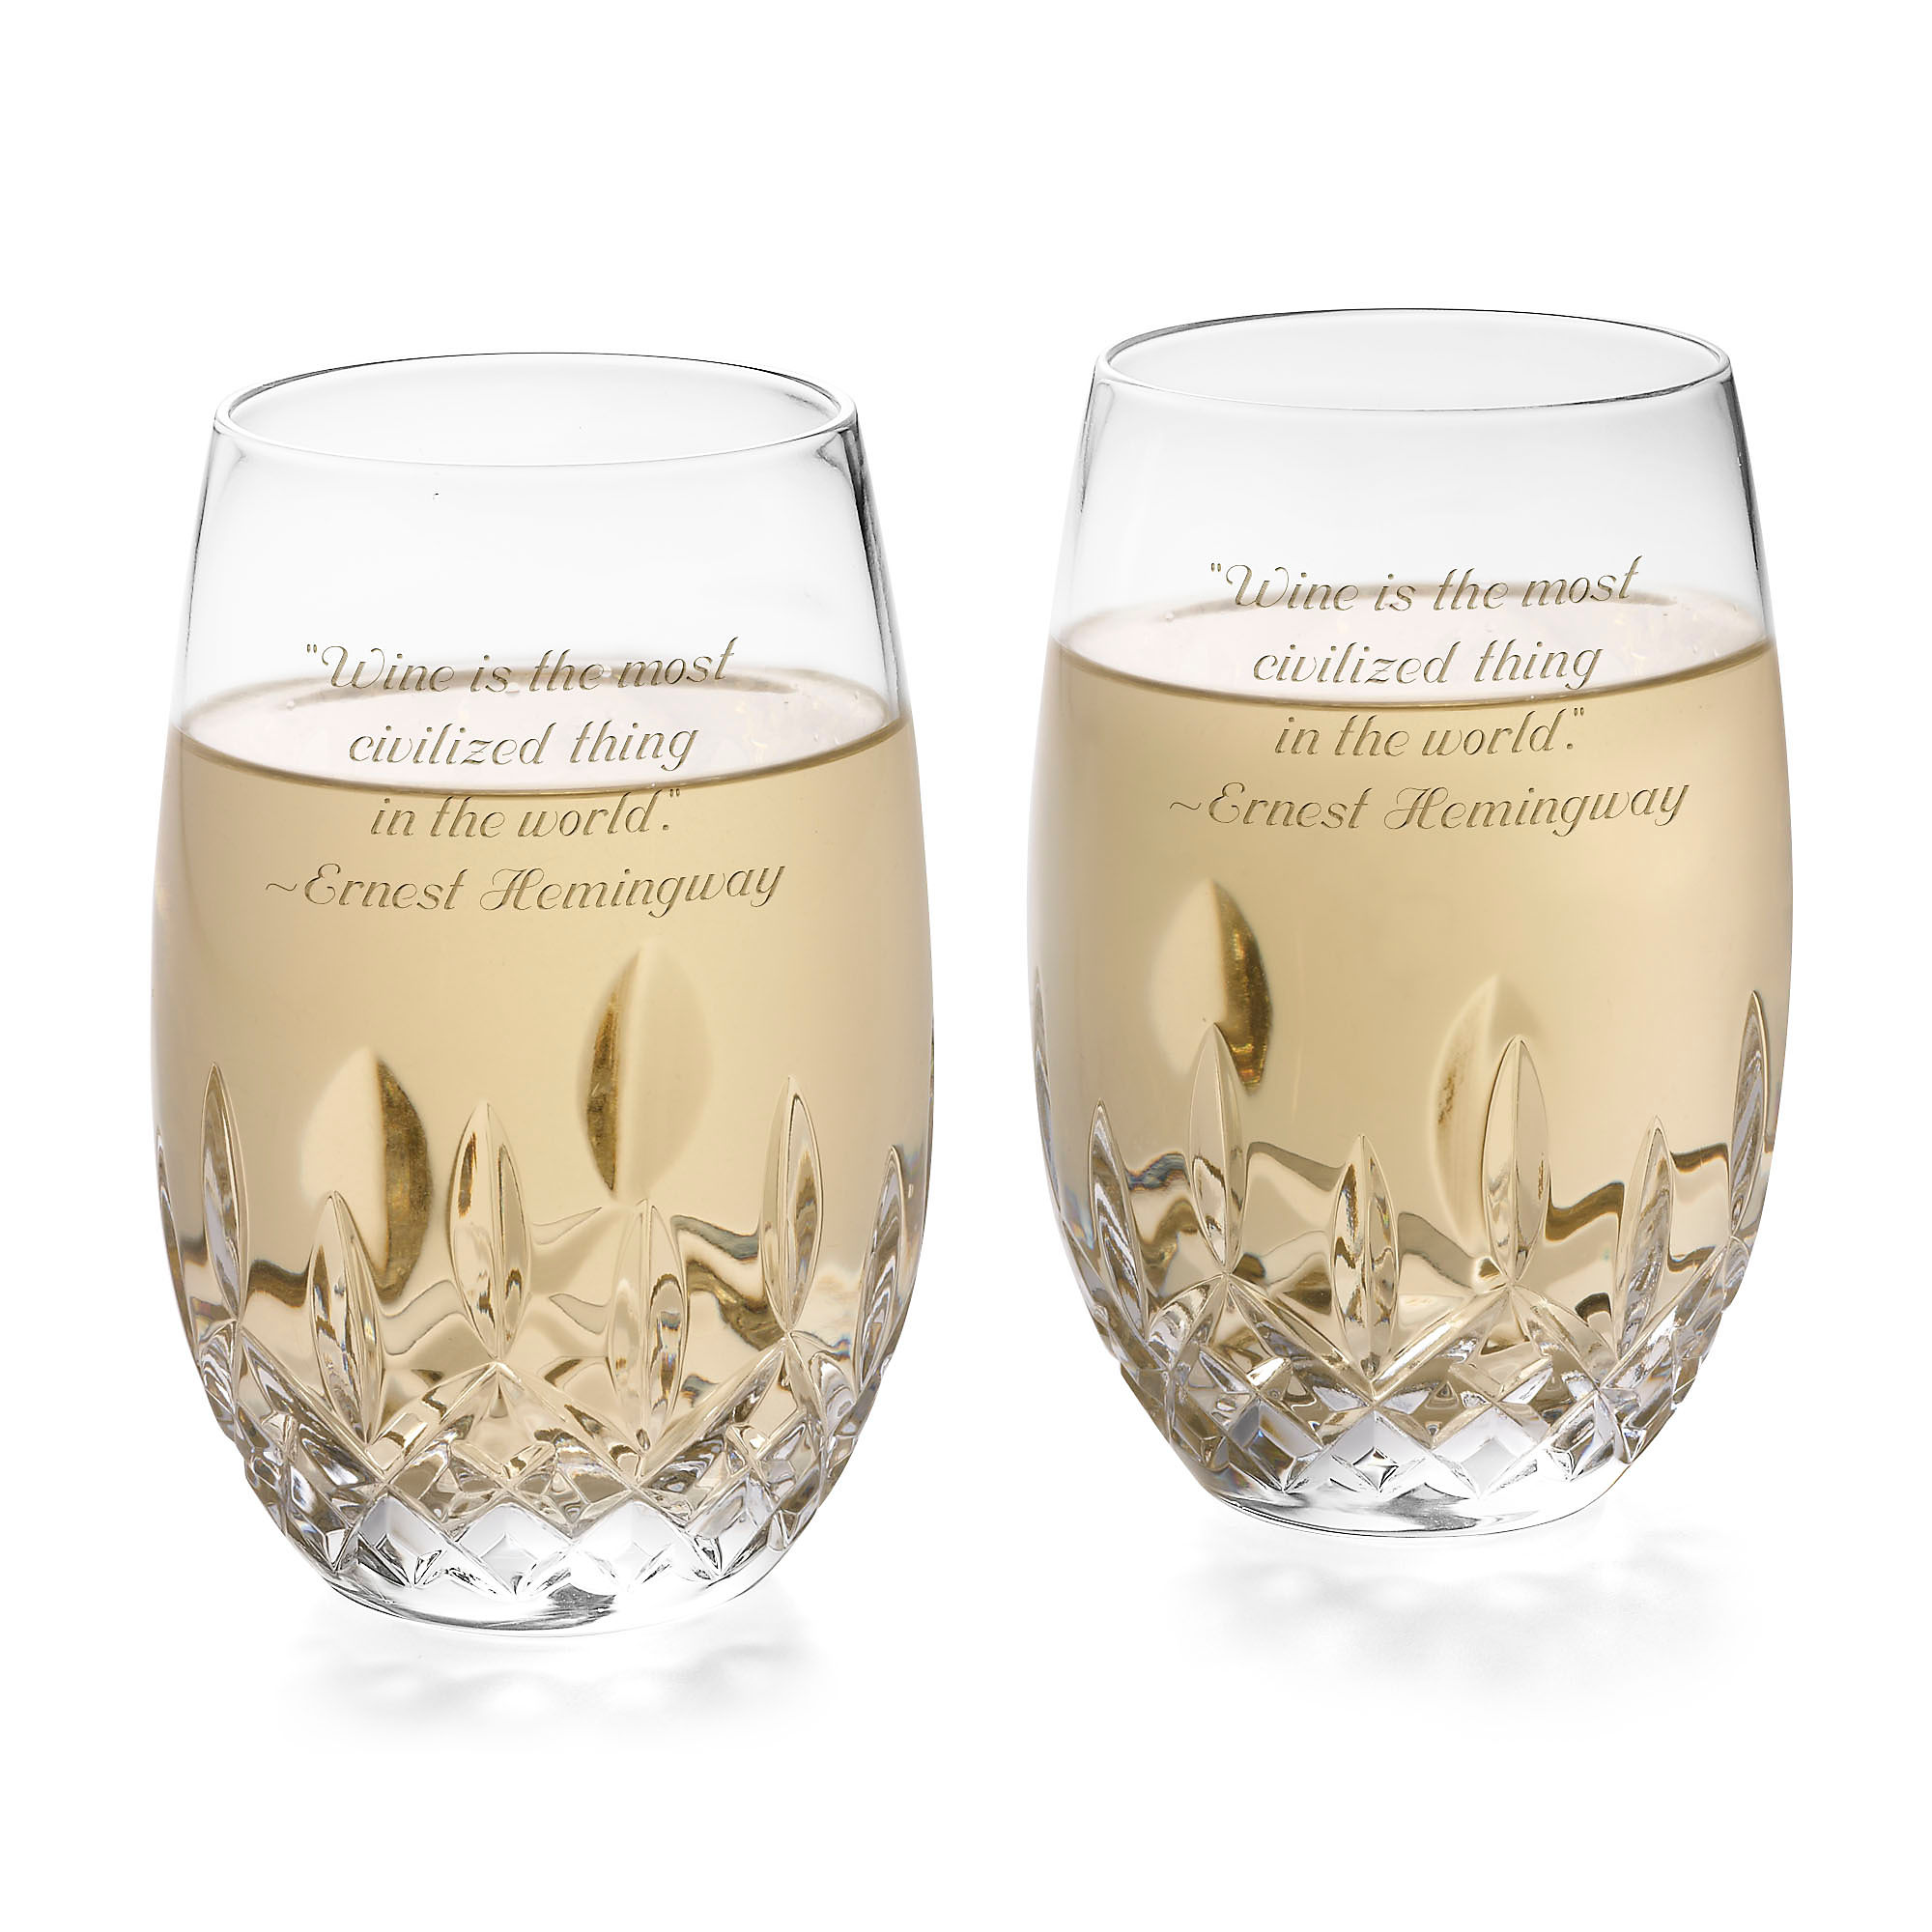 Waterford Crystal Lismore Nouveau White Stemless Wine Glass Engraved PAIR 